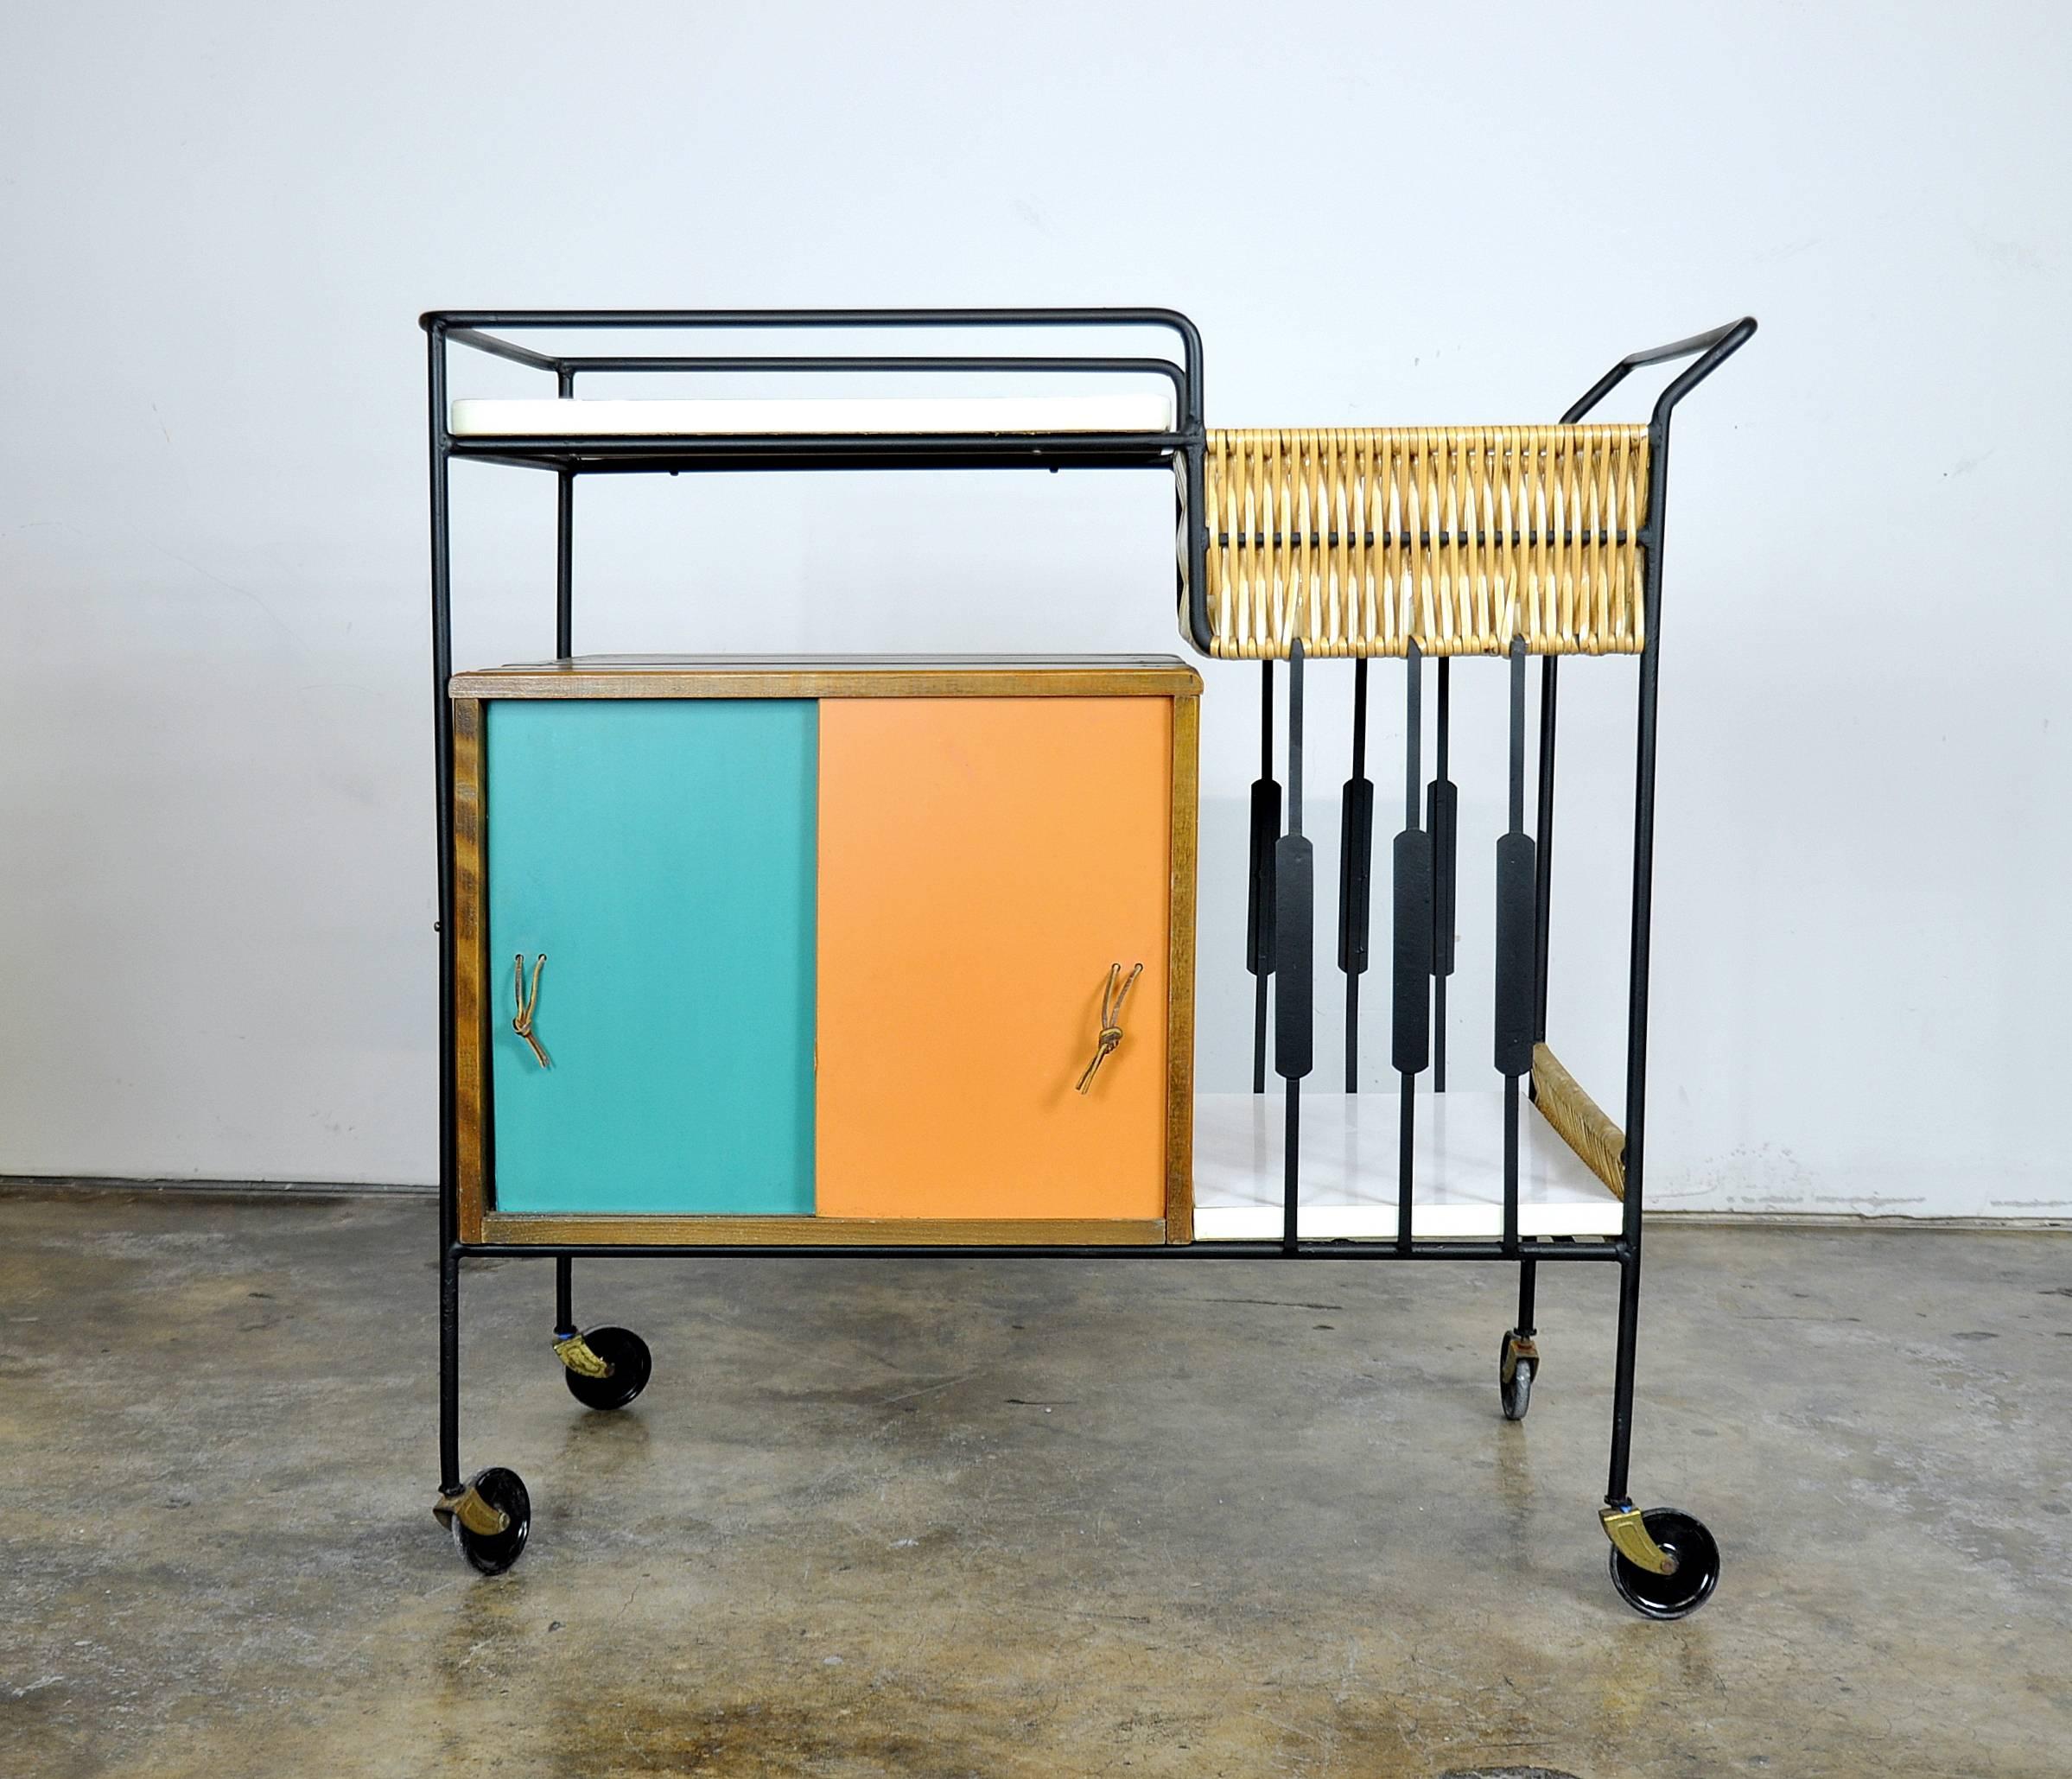 Lovely Mid-Century Modern vintage rolling bar cart designed by Arthur Umanoff for The Elton Company in circa 1952. The serving tea trolley features colorful turquoise and orange sliding doors with leather pulls, slatted wood portions, white bar top